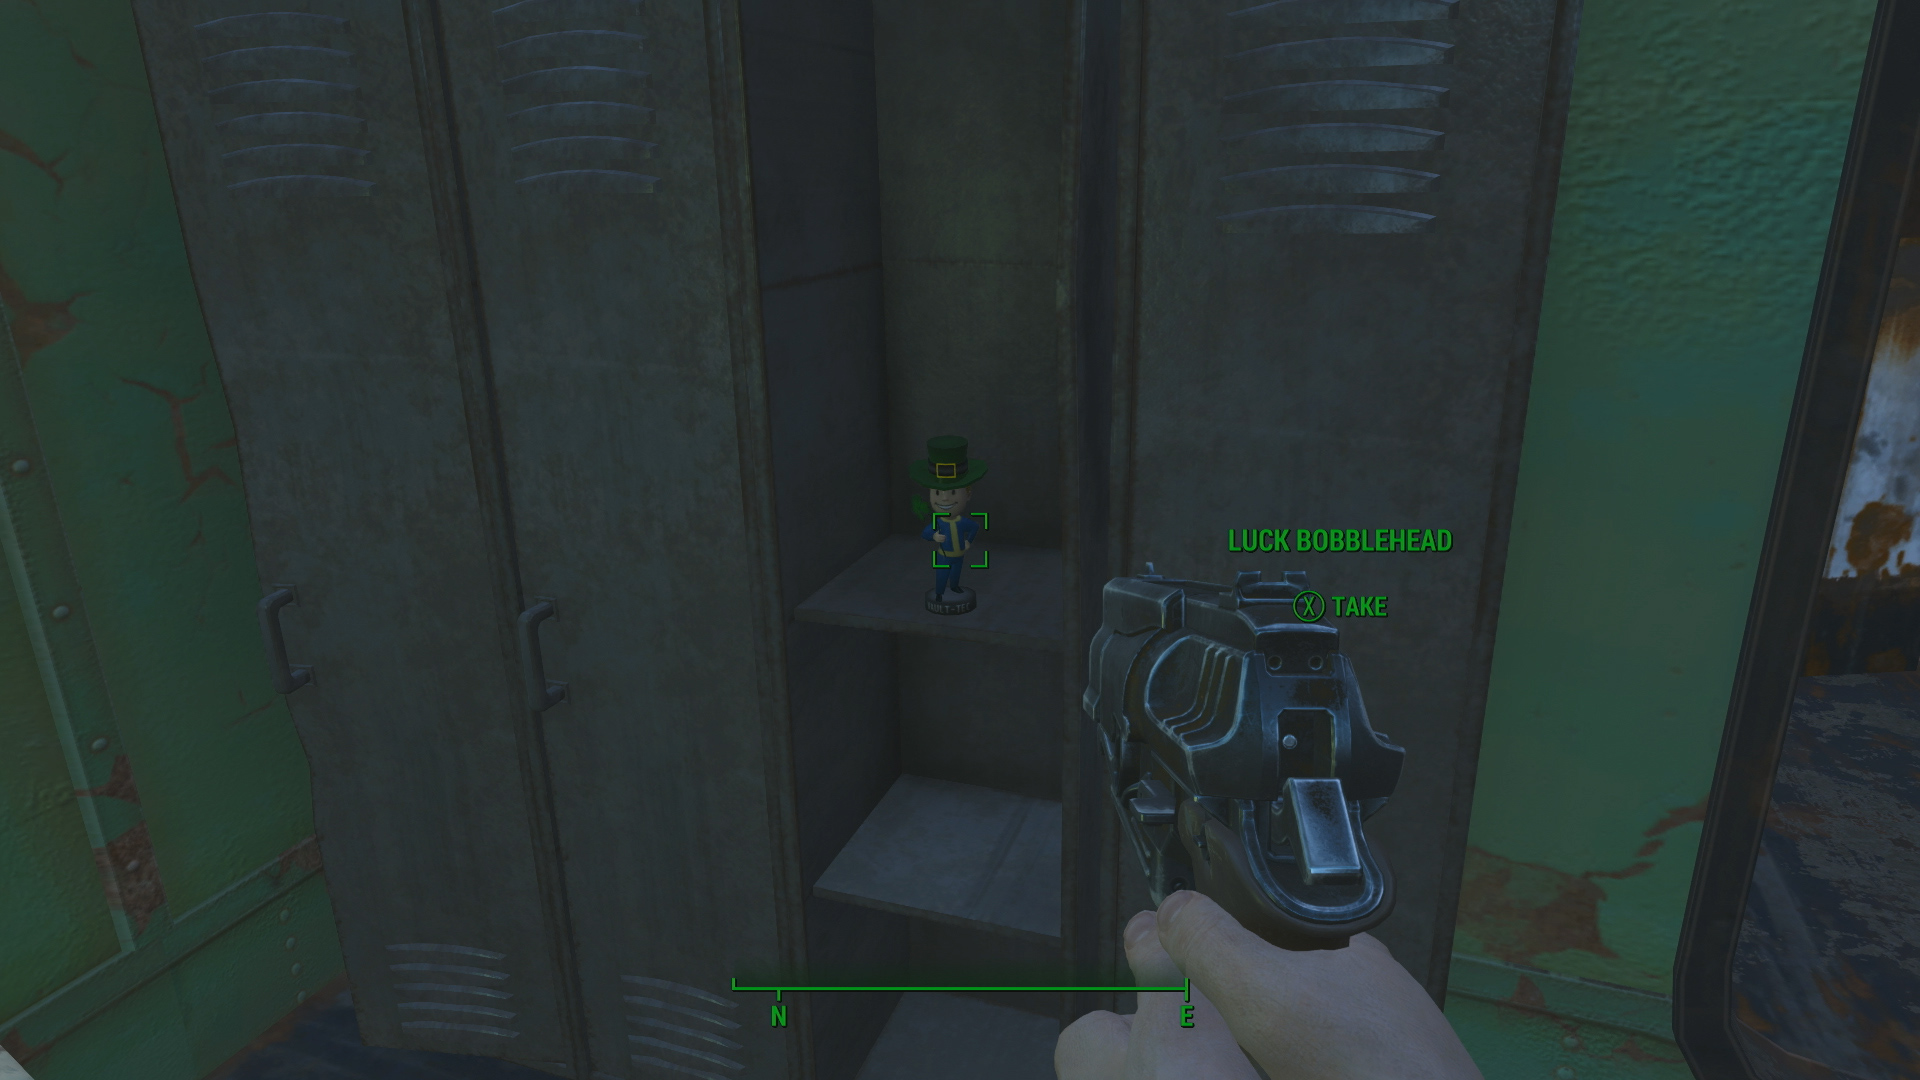 Bobbleheads fallout 4 what do they do фото 22